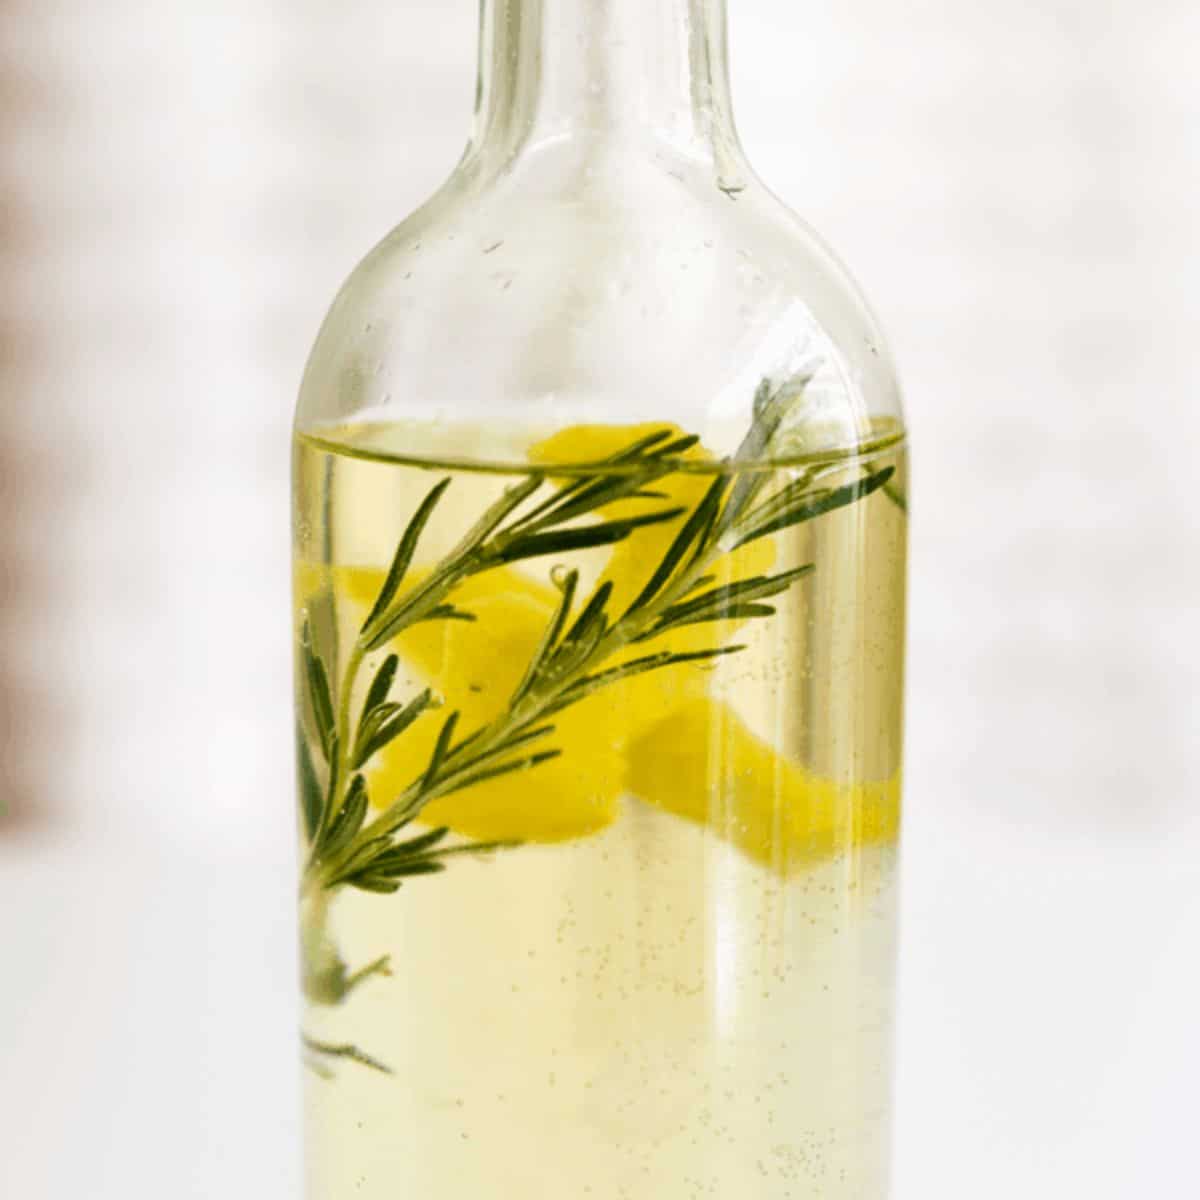 Close up of a bottle of white wine with lemon peel and rosemary sprigs in it.